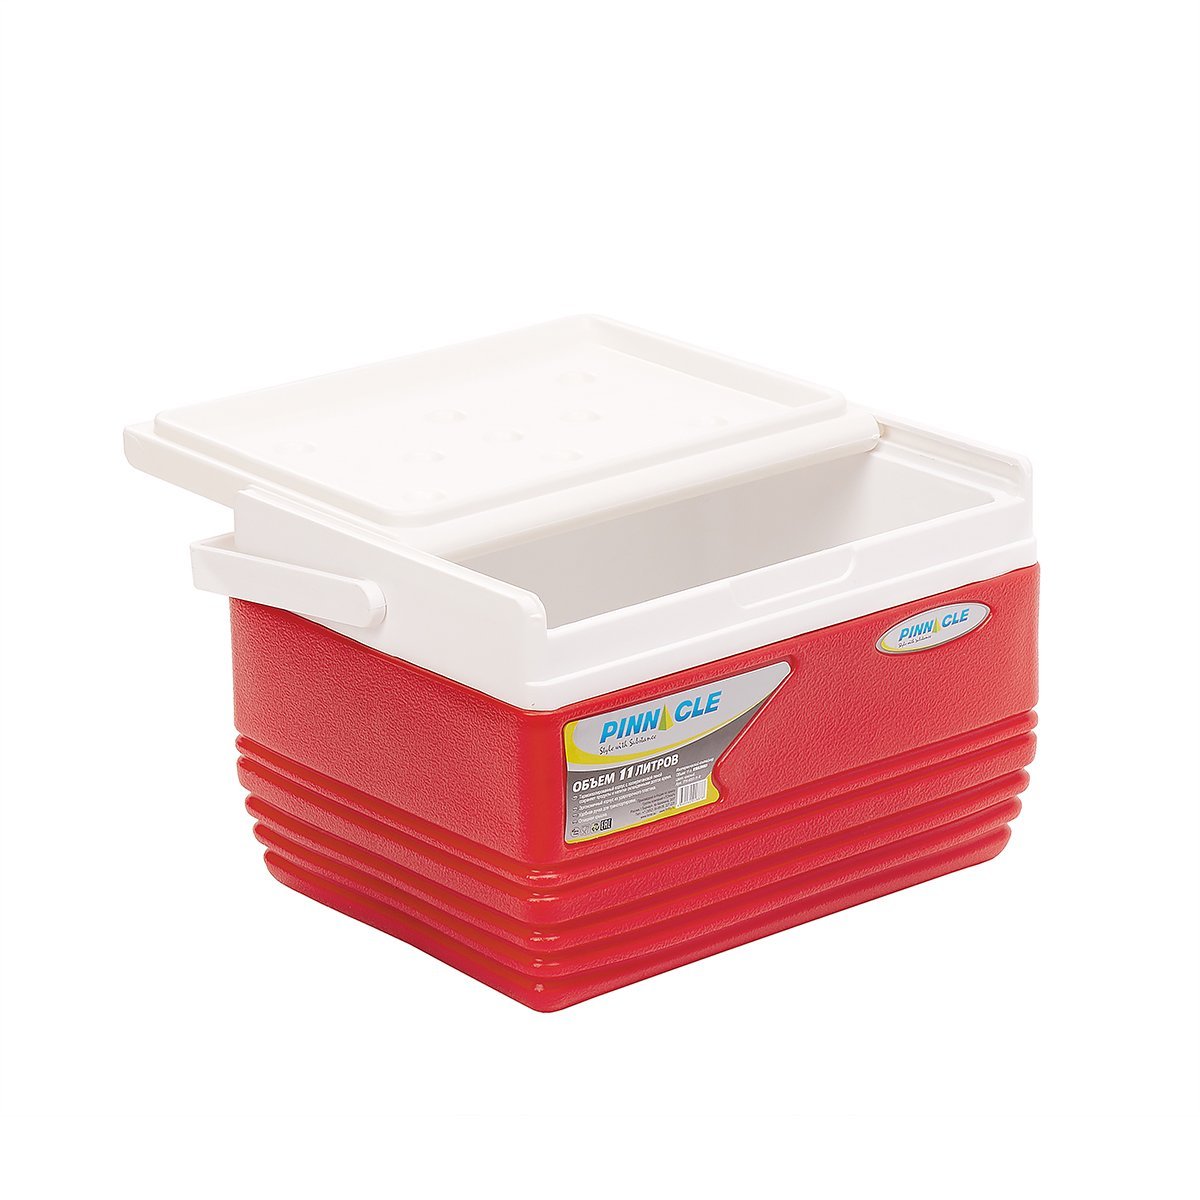 Eskimo Portable Hard-Sided Ice Chest for Camping, 11 qt, Red with a lid half opened